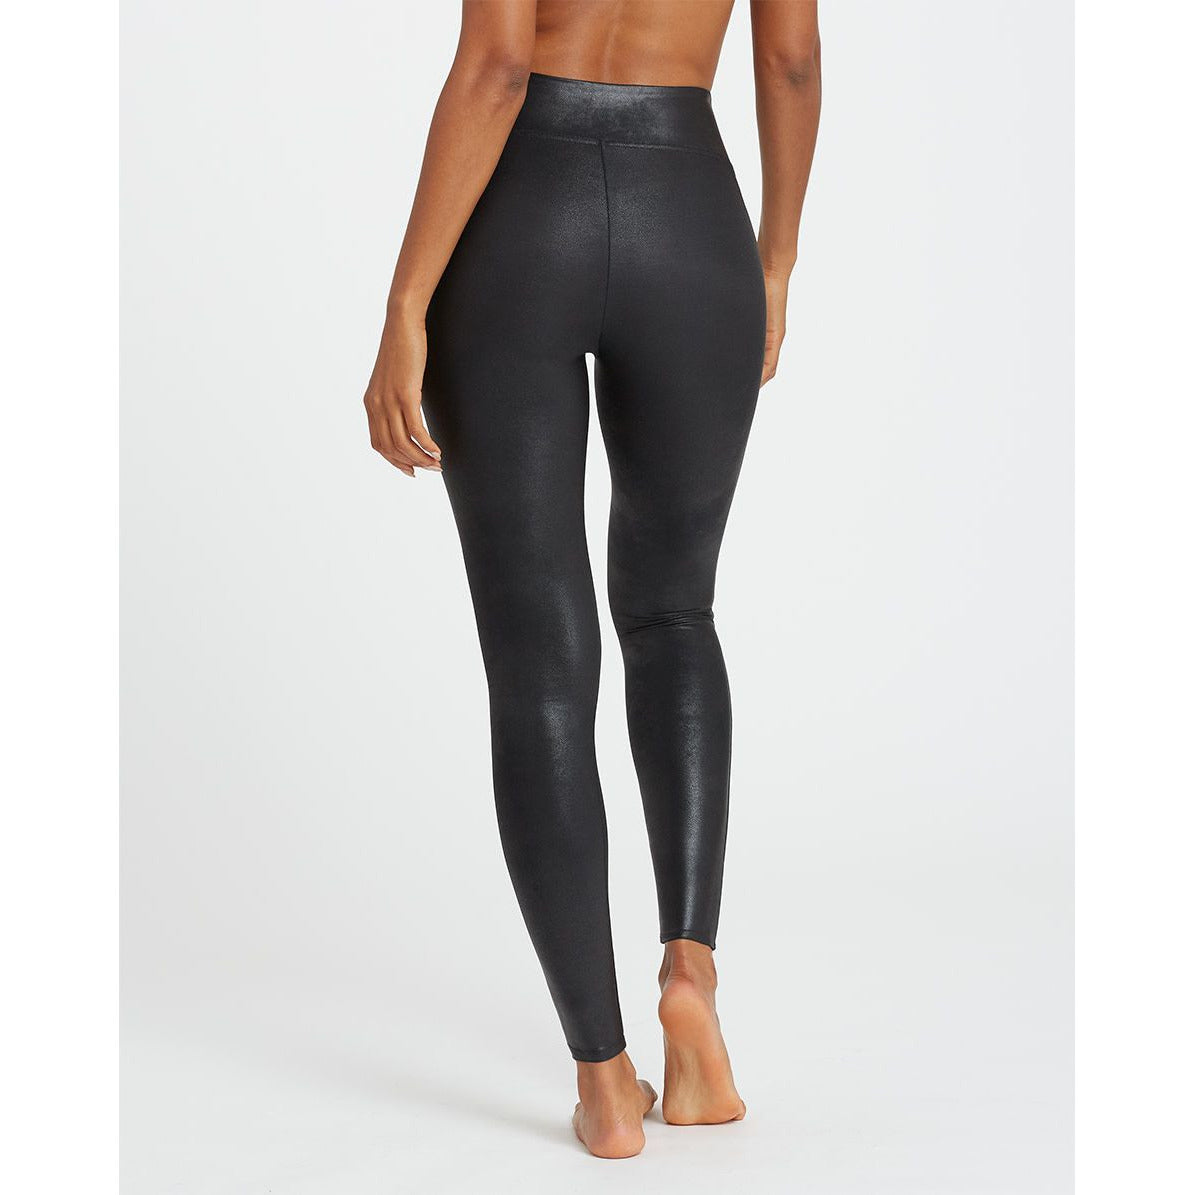 SPANX Faux Leather Leggings, Black, X-Small 